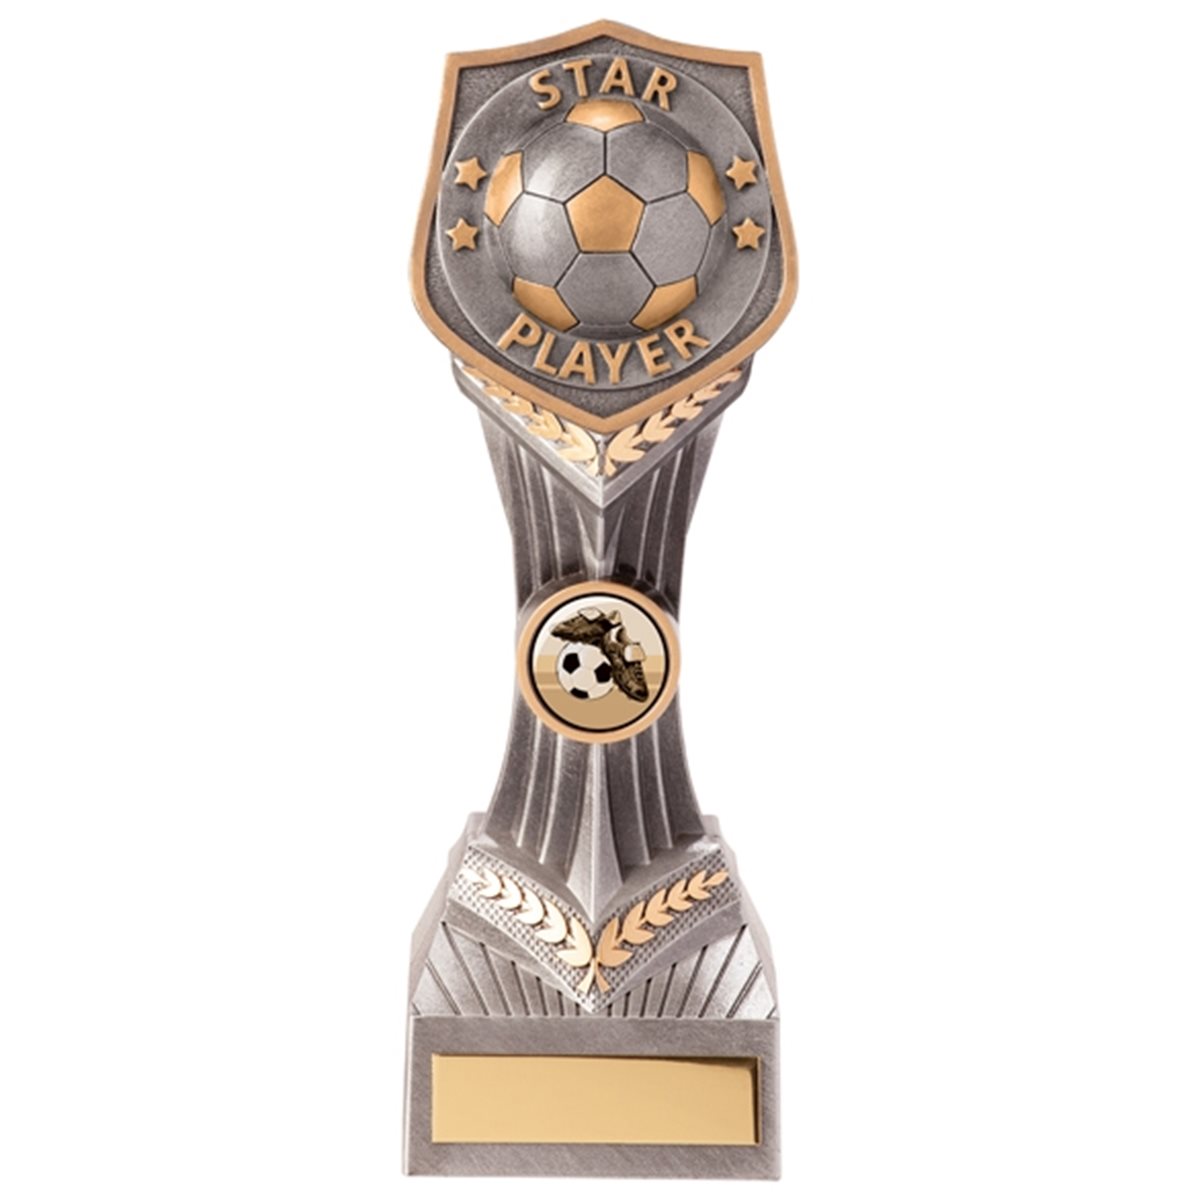 Falcon Star Player Football Trophy PA20048